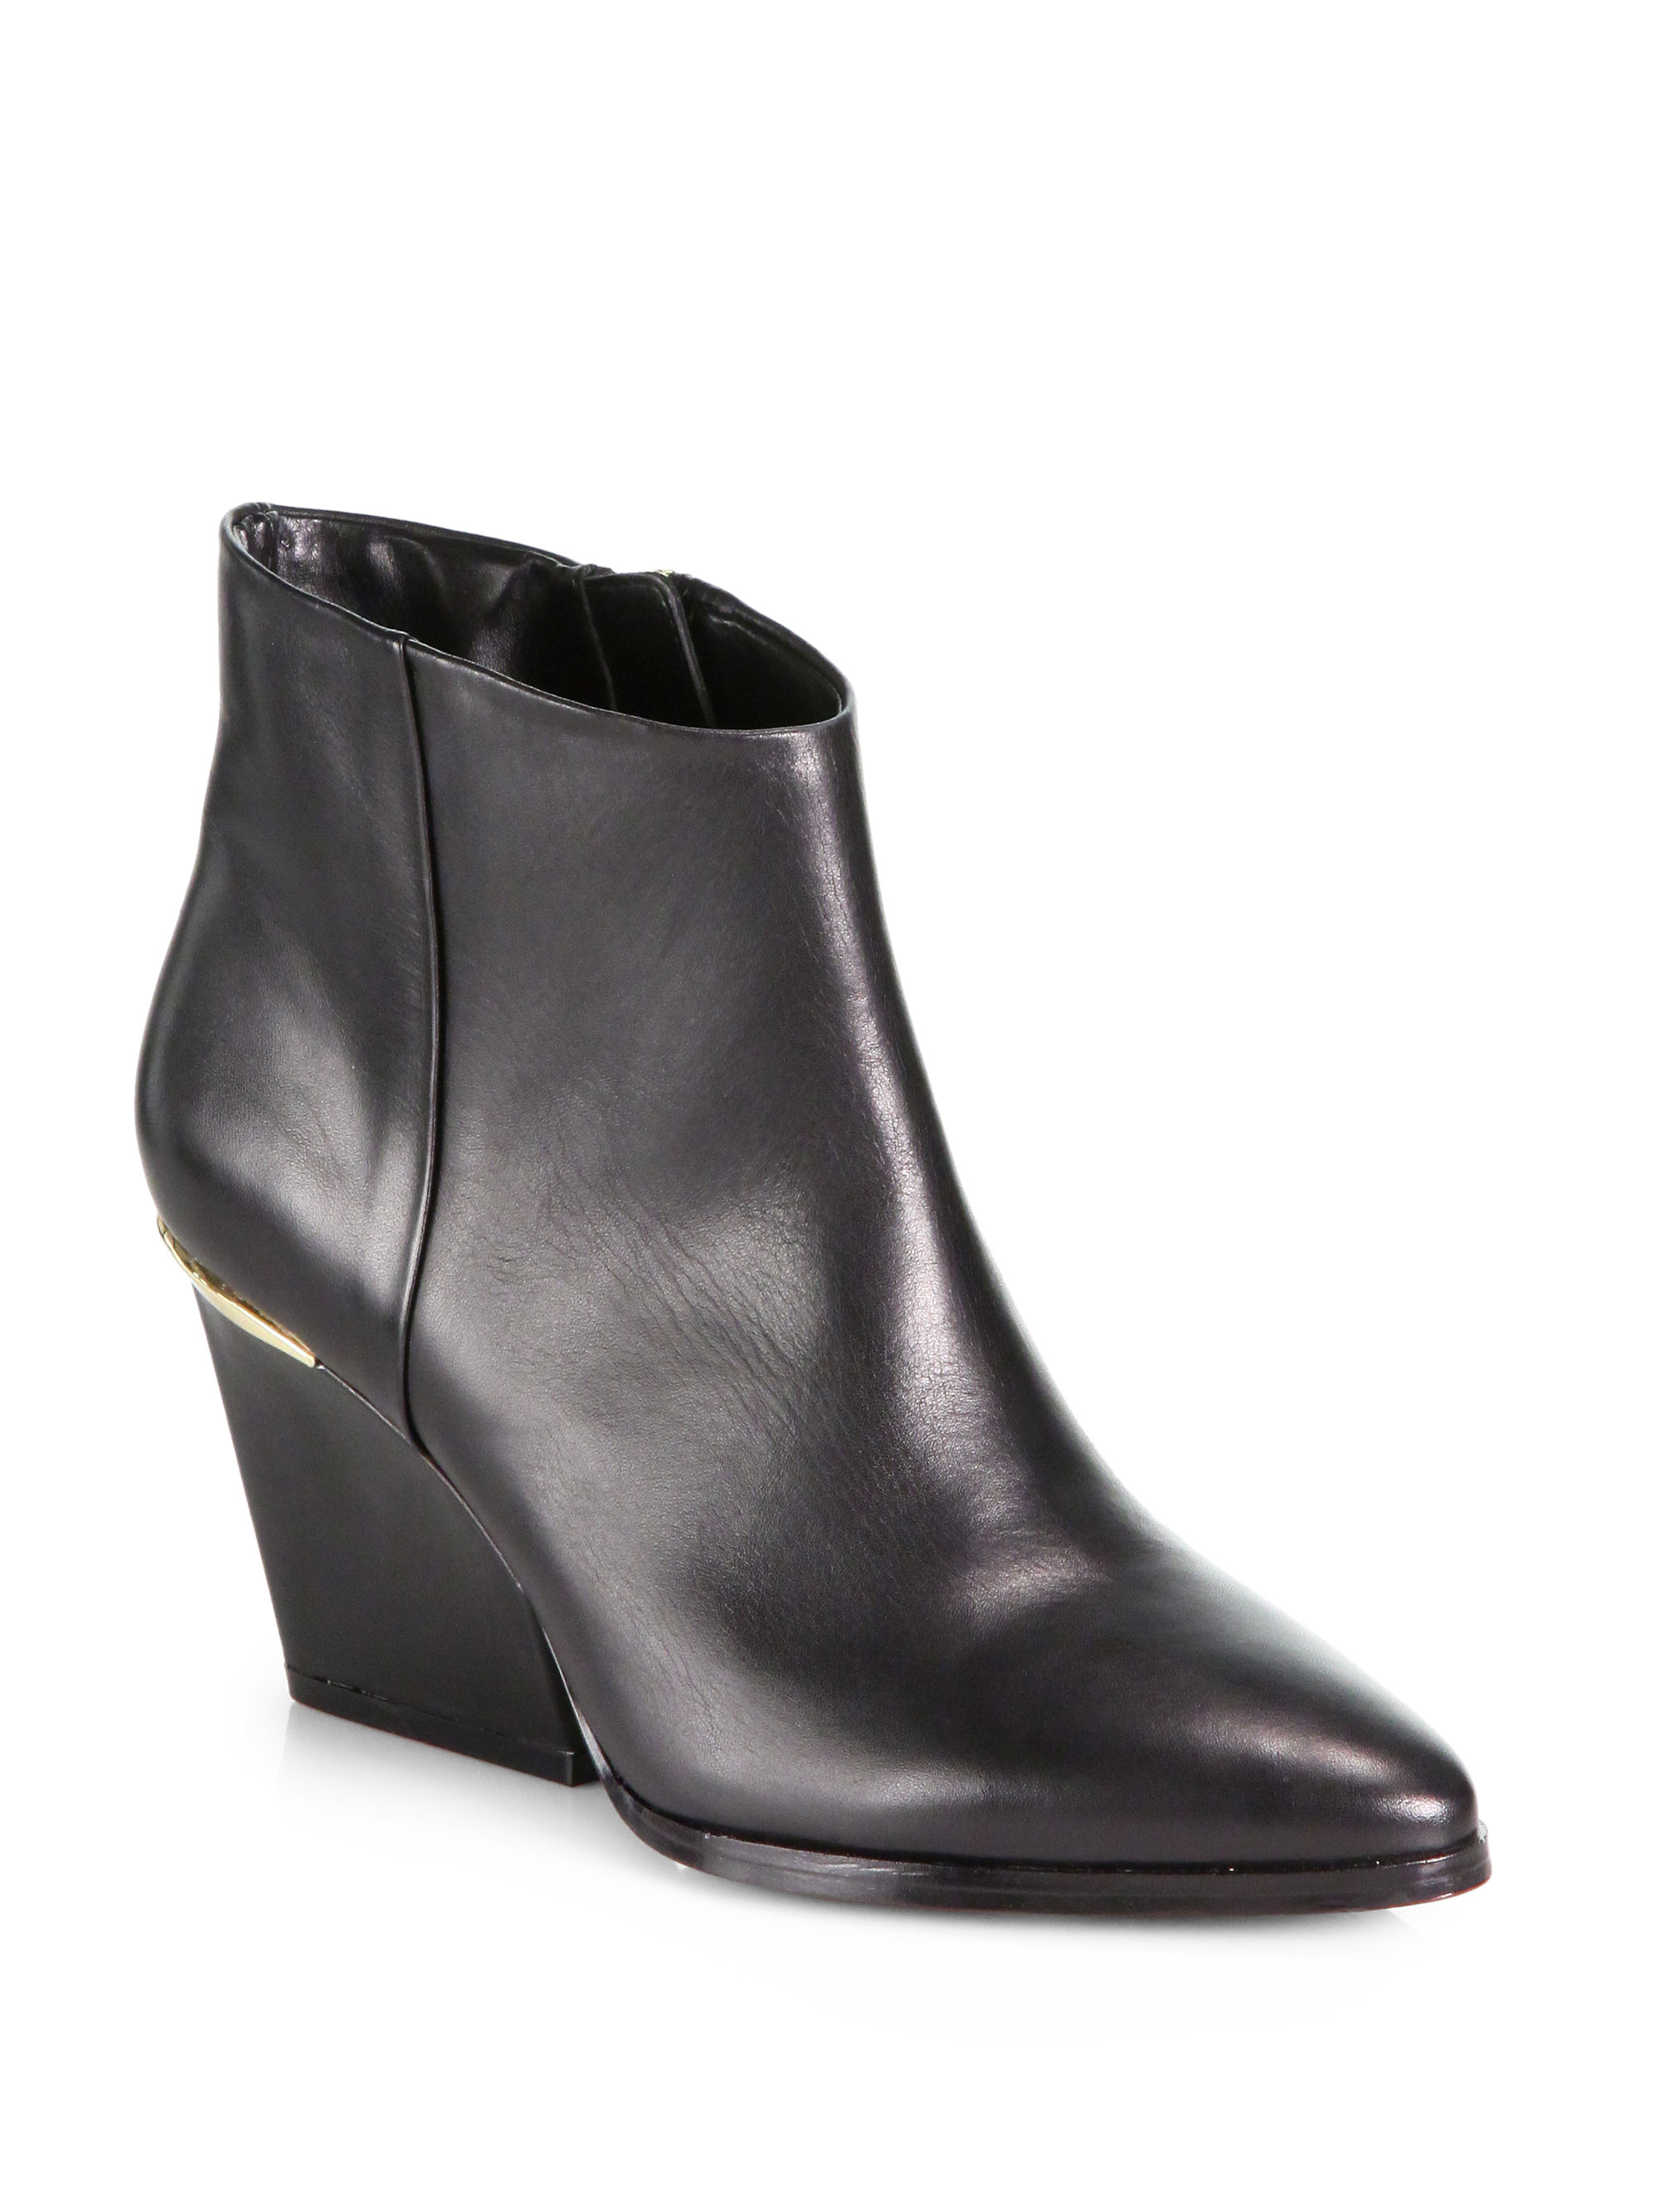 Boutique 9 Isoke Western Leather Wedge Ankle Boots in Gray | Lyst